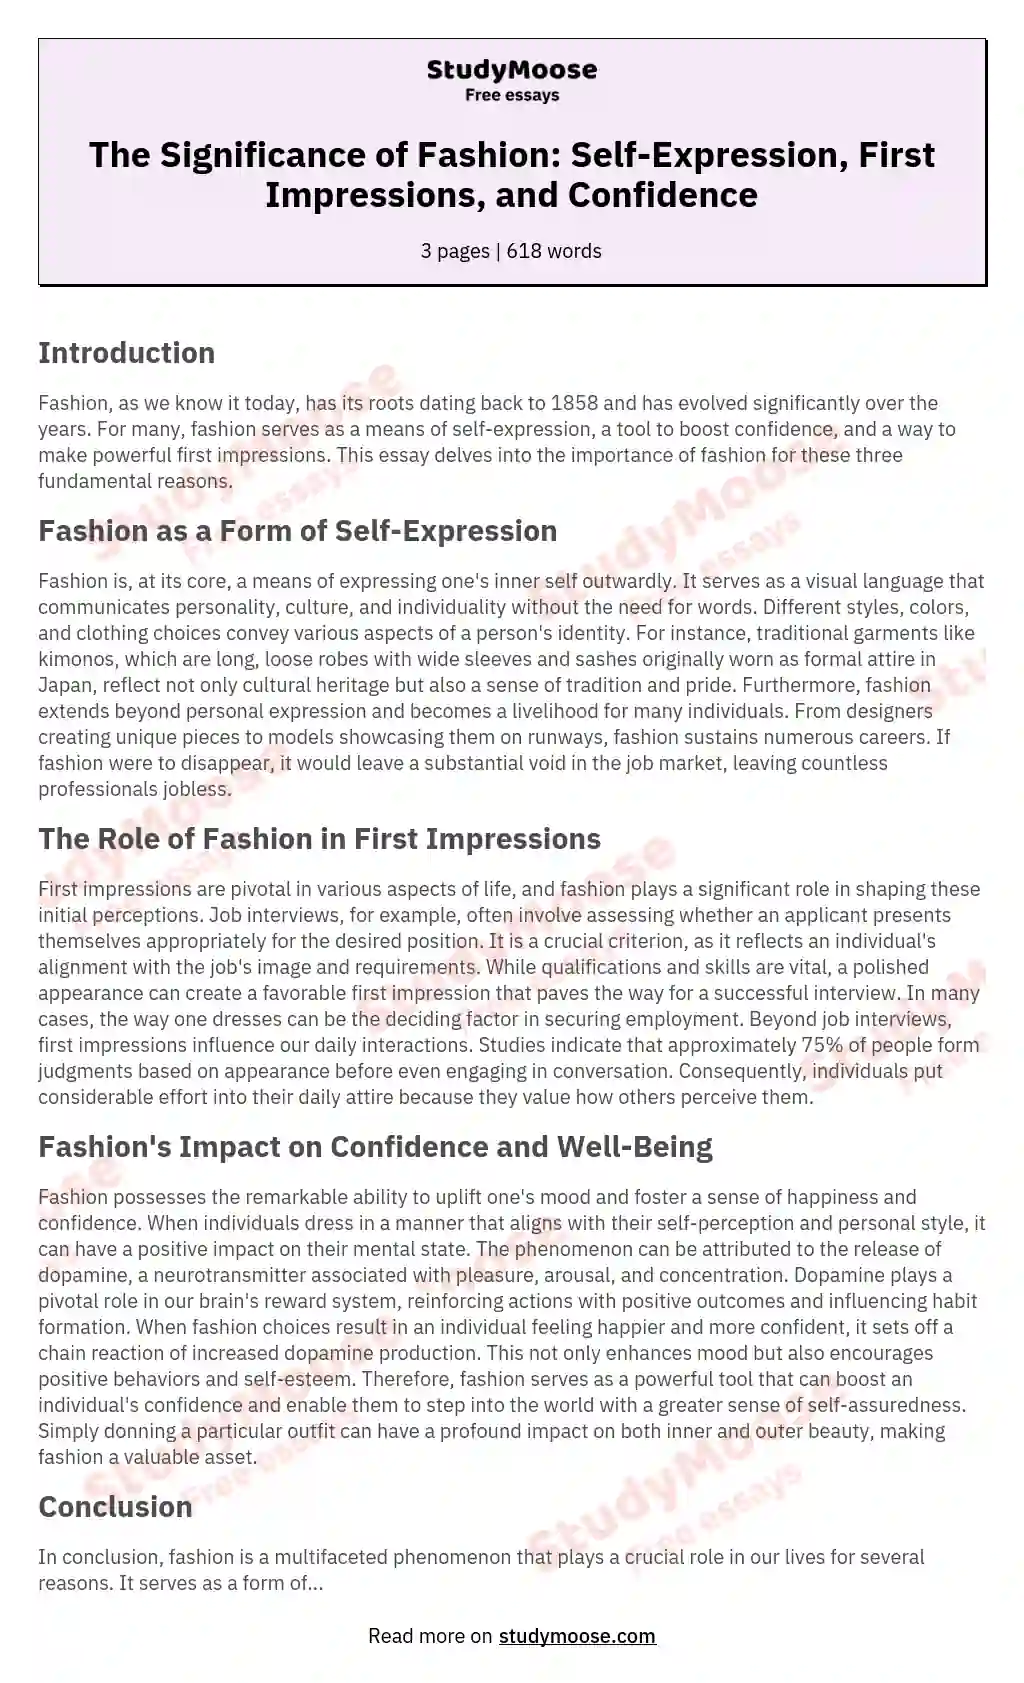 The Significance of Fashion: Self-Expression, First Impressions, and Confidence essay